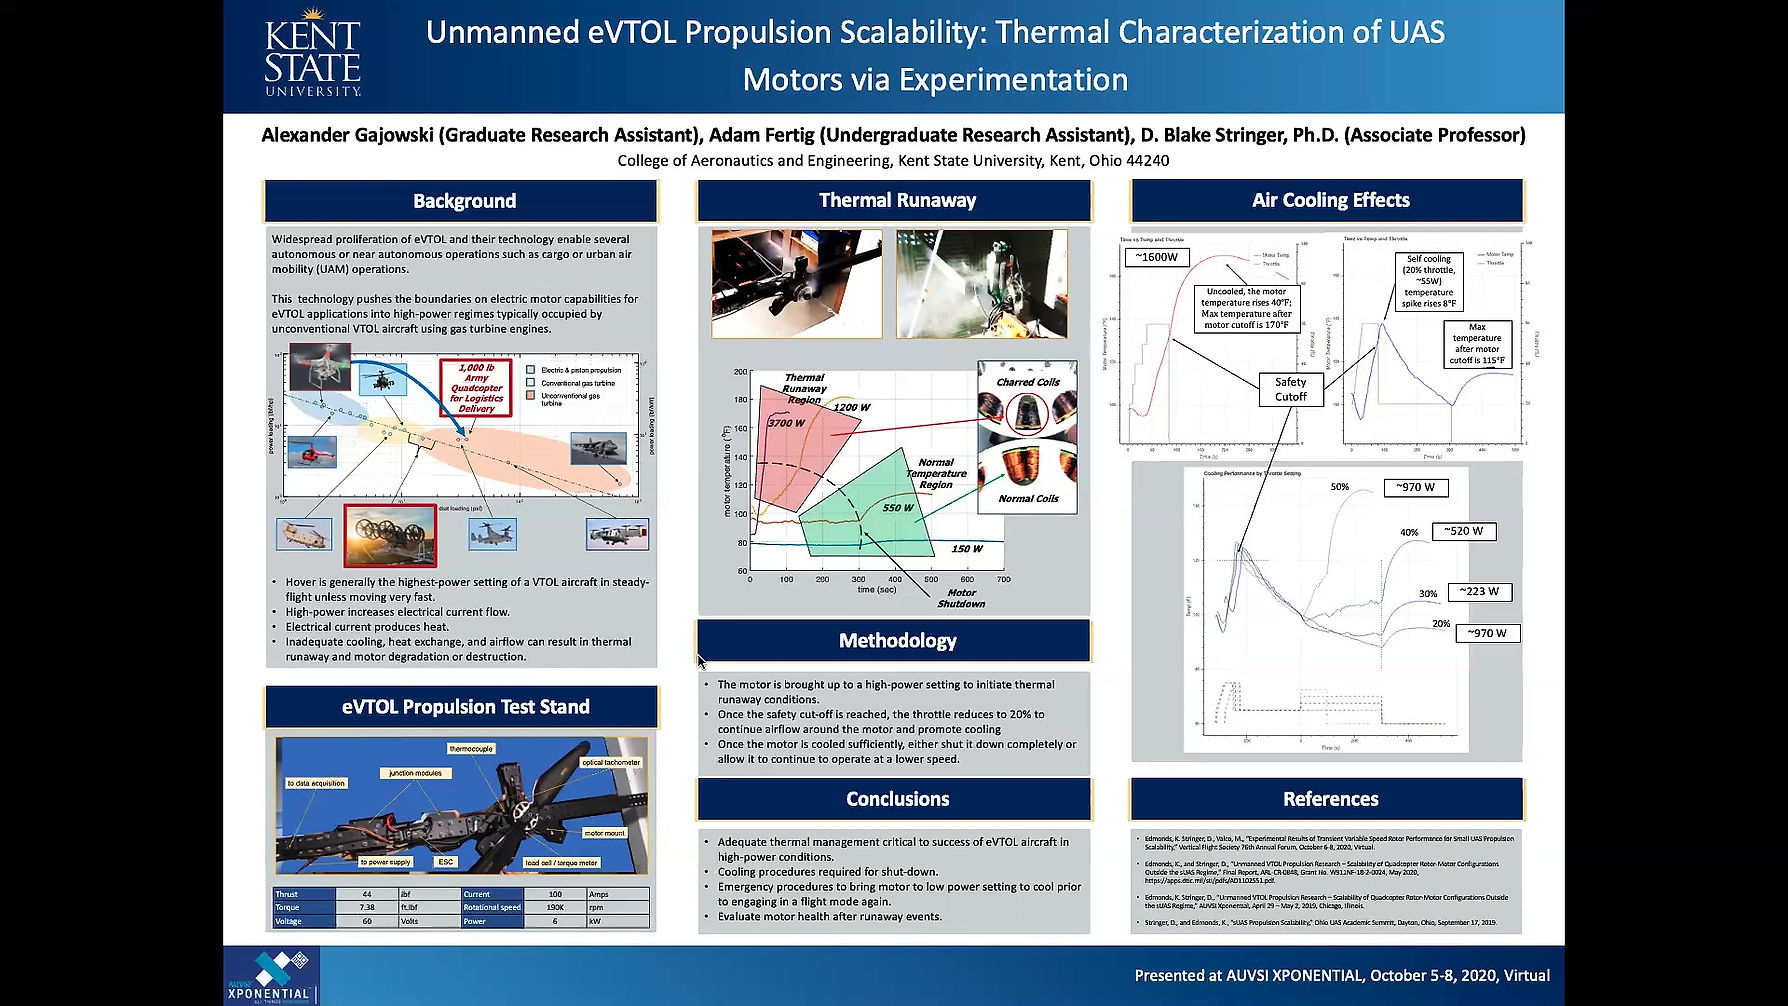 Unmanned eVTOL Propulsion Scalability: Thermal Characterization of UAS Motors via Experimentation